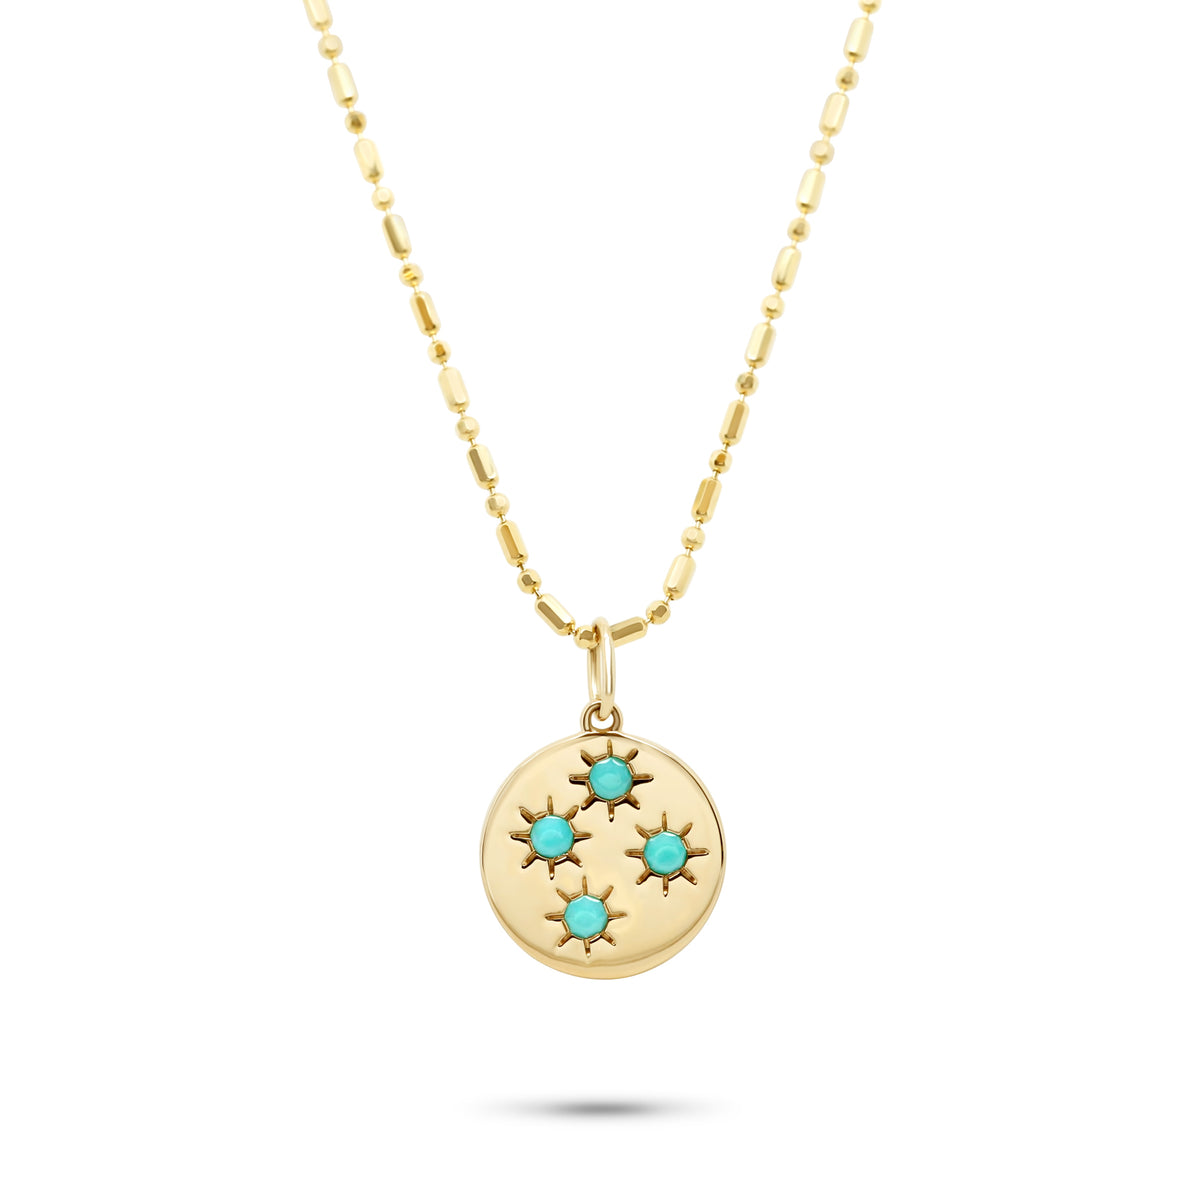 14k yellow gold disc charm with turquoise accent necklace on bar bead chain